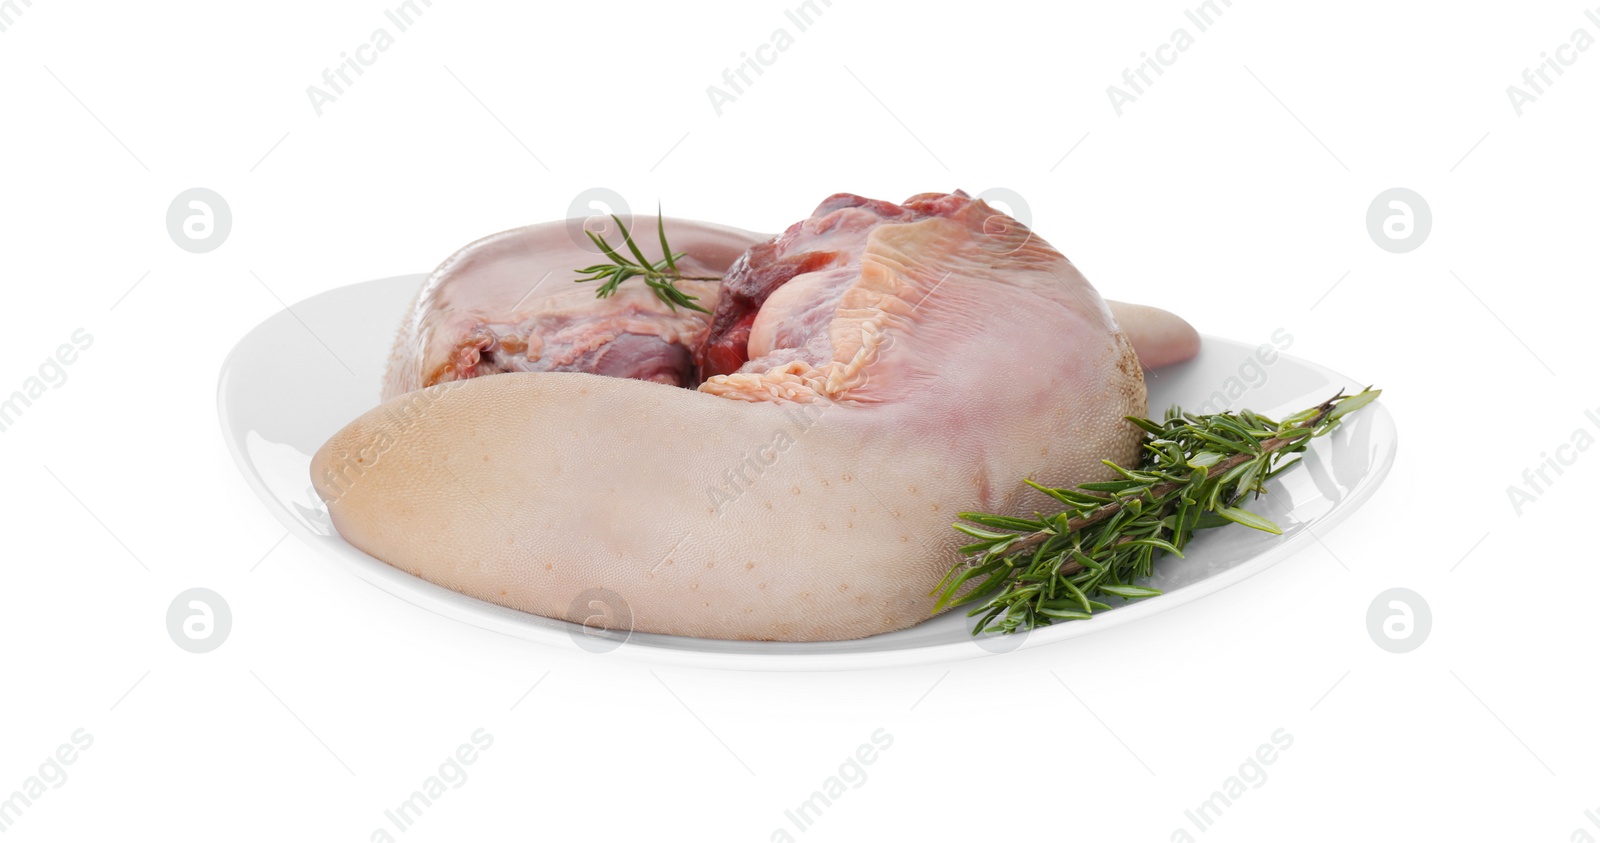 Photo of Plate with raw beef tongues and rosemary on white background